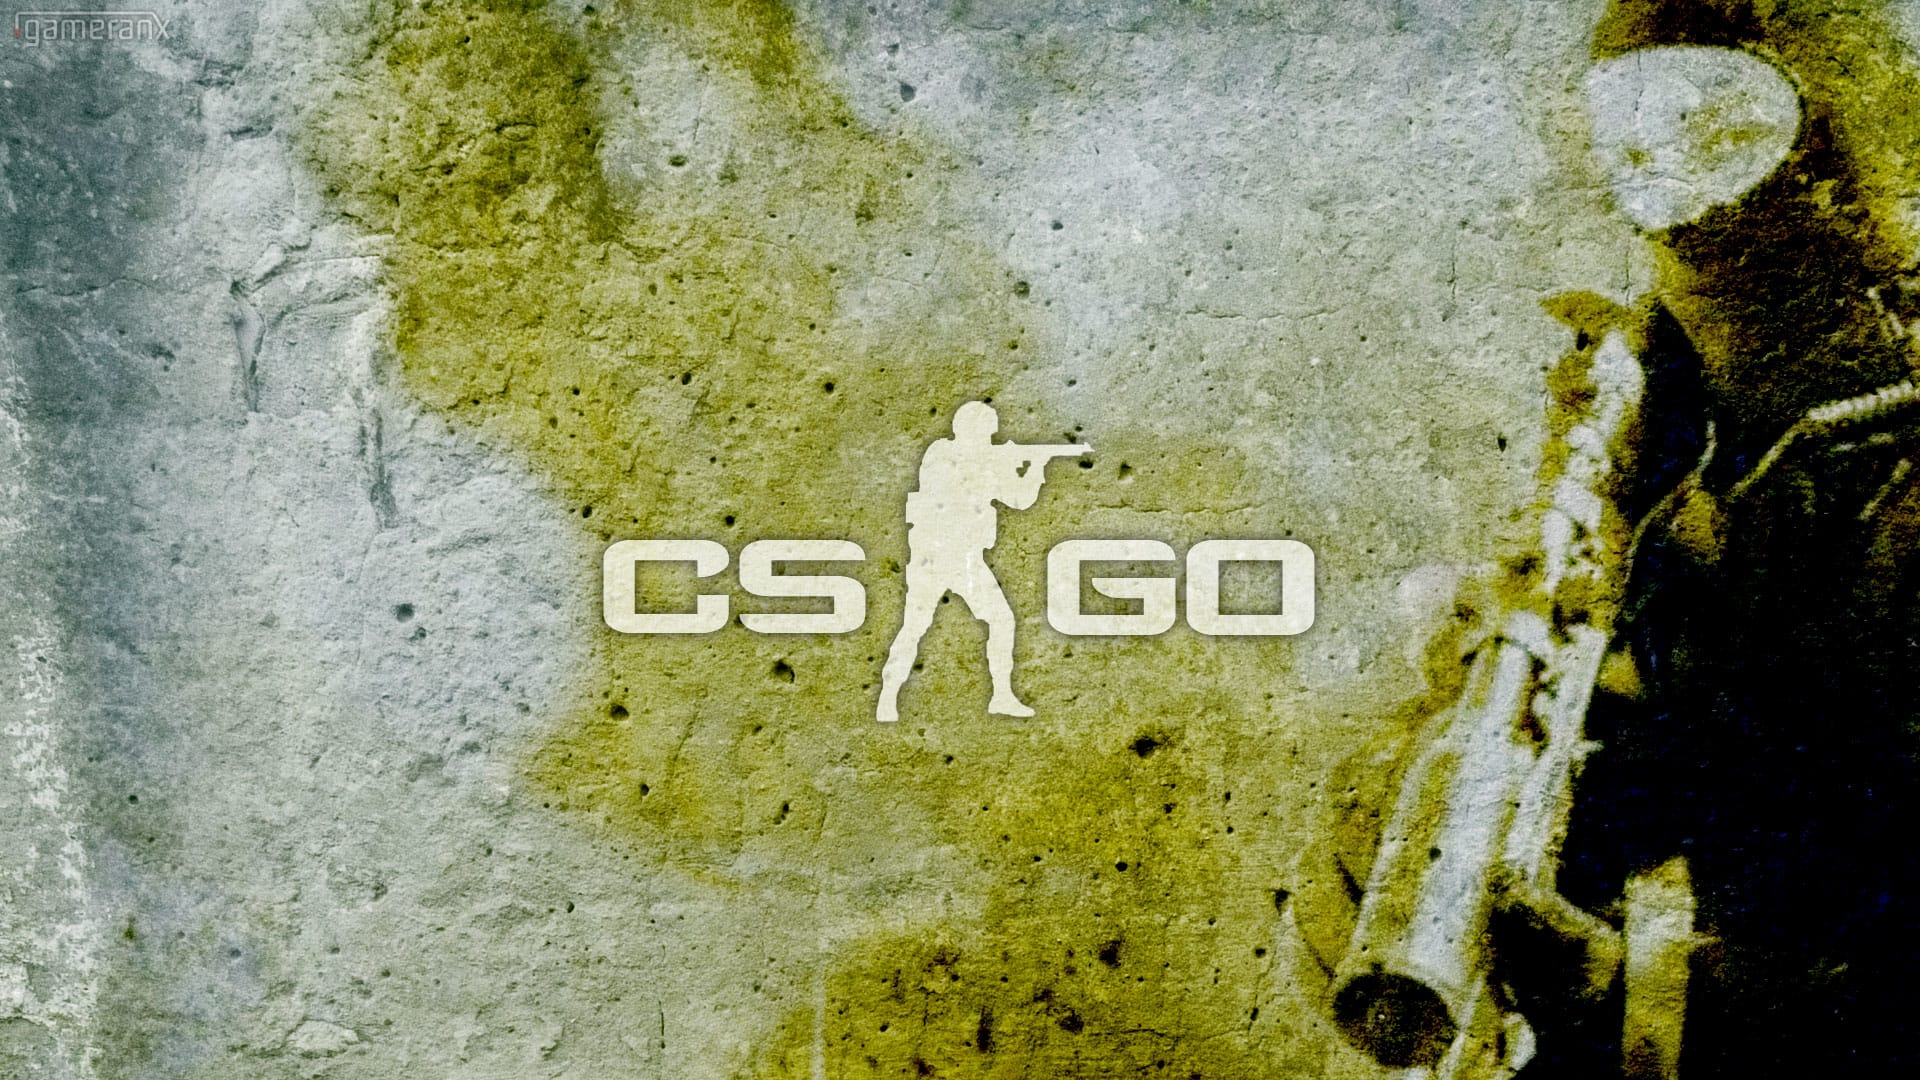 counter strike global offensive 2 download